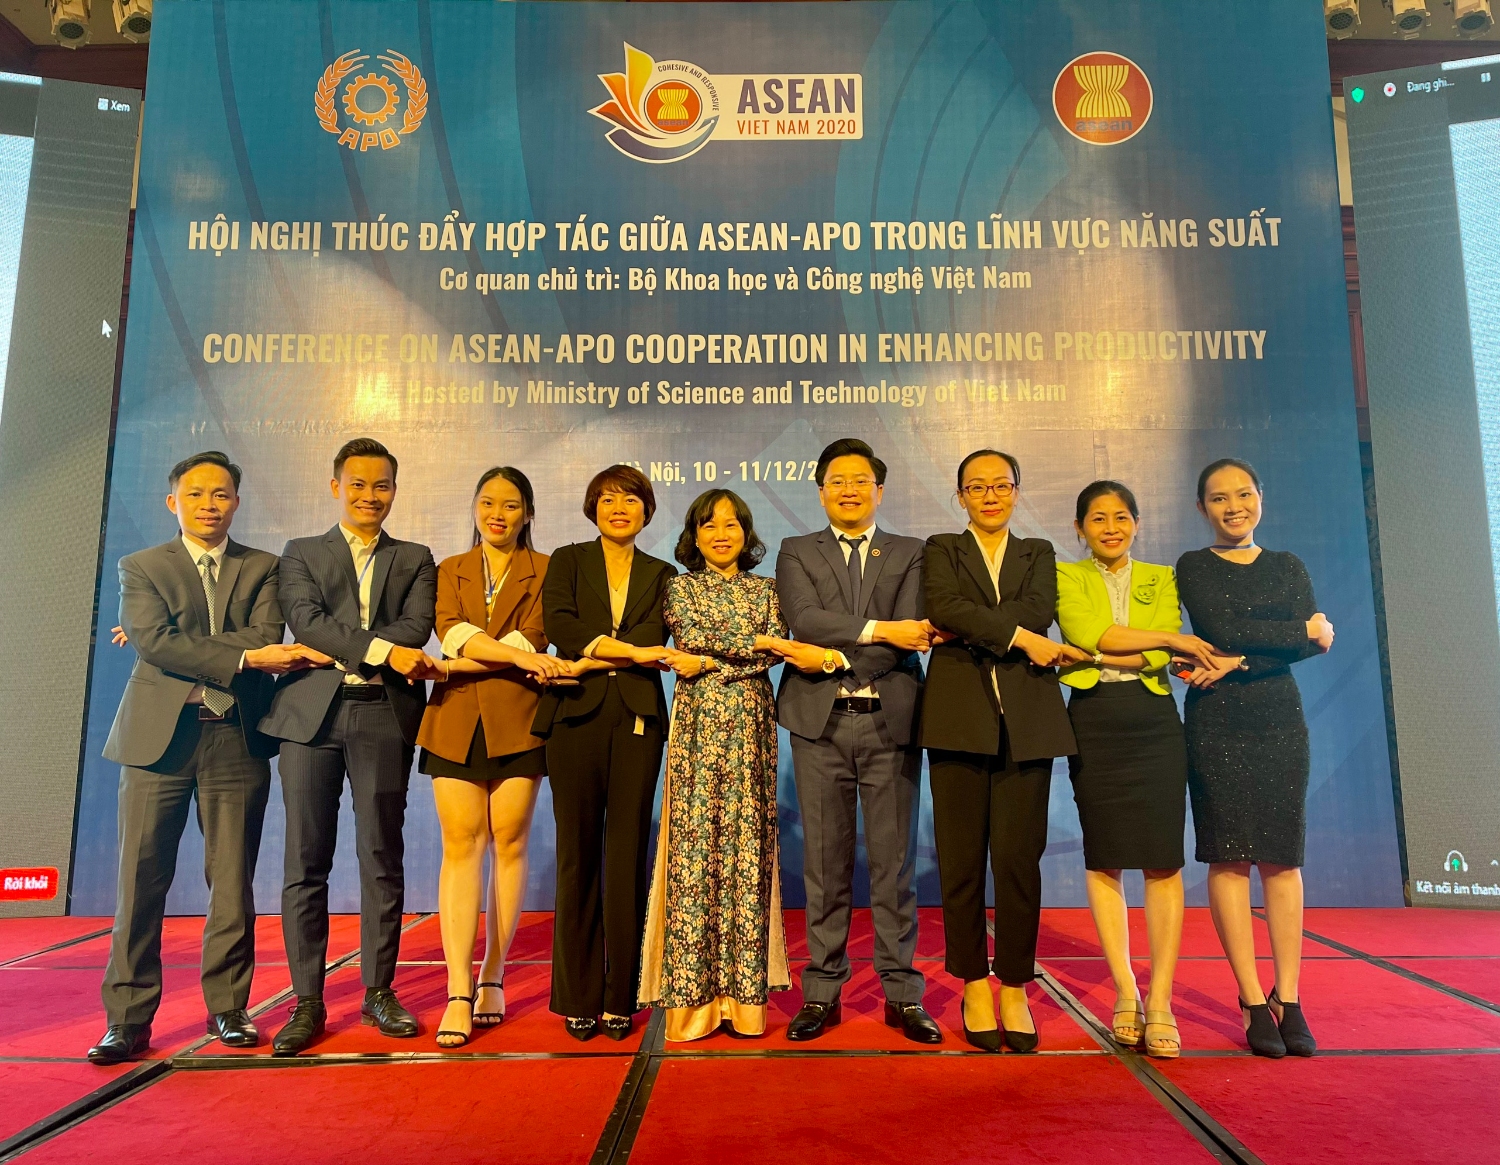 CONFERENCE ON ASEAN-APO COOPERATION IN  ENHANCING PRODUCTIVITY